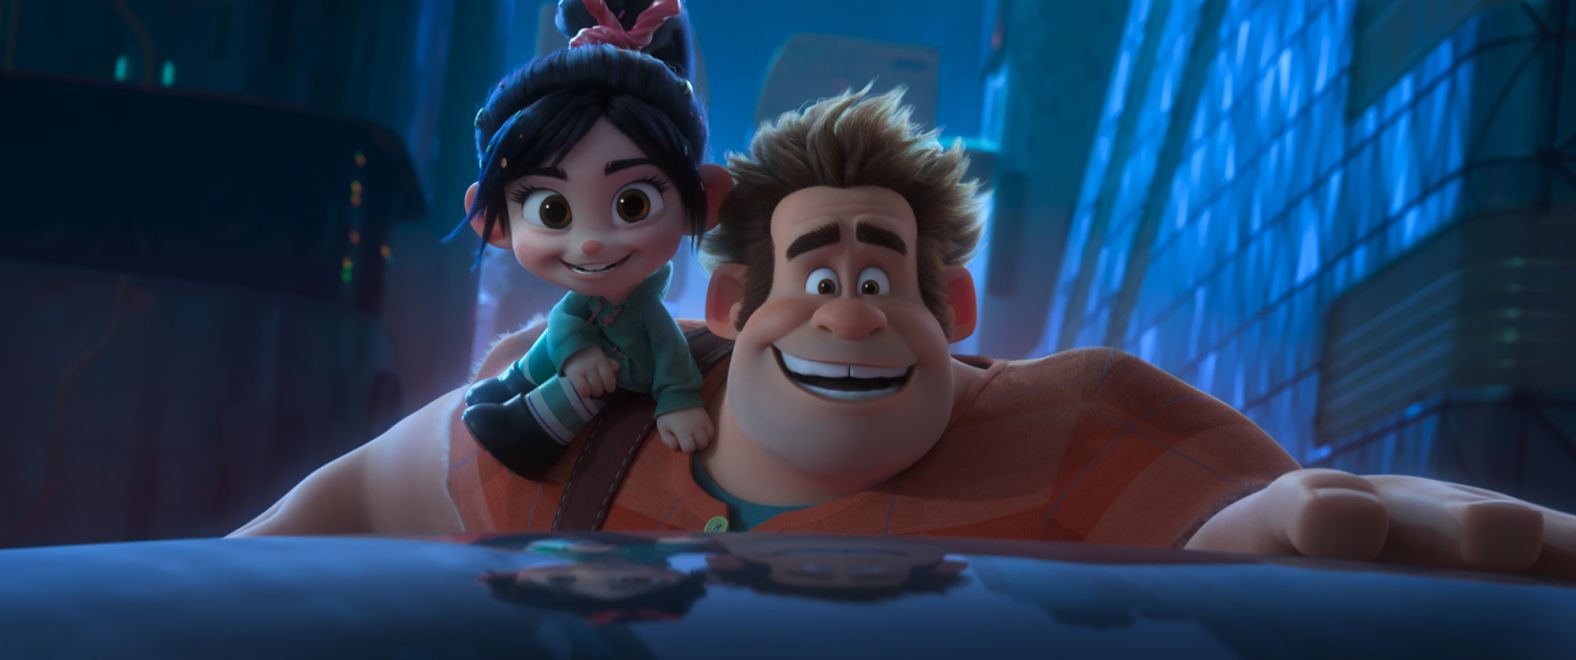 <strong>"Ralph Breaks the Internet"</strong>: Ralph and Vanellope's friendship is challenged when they journey into the internet in search of a replacement part for her game. <strong>(Disney+) </strong>